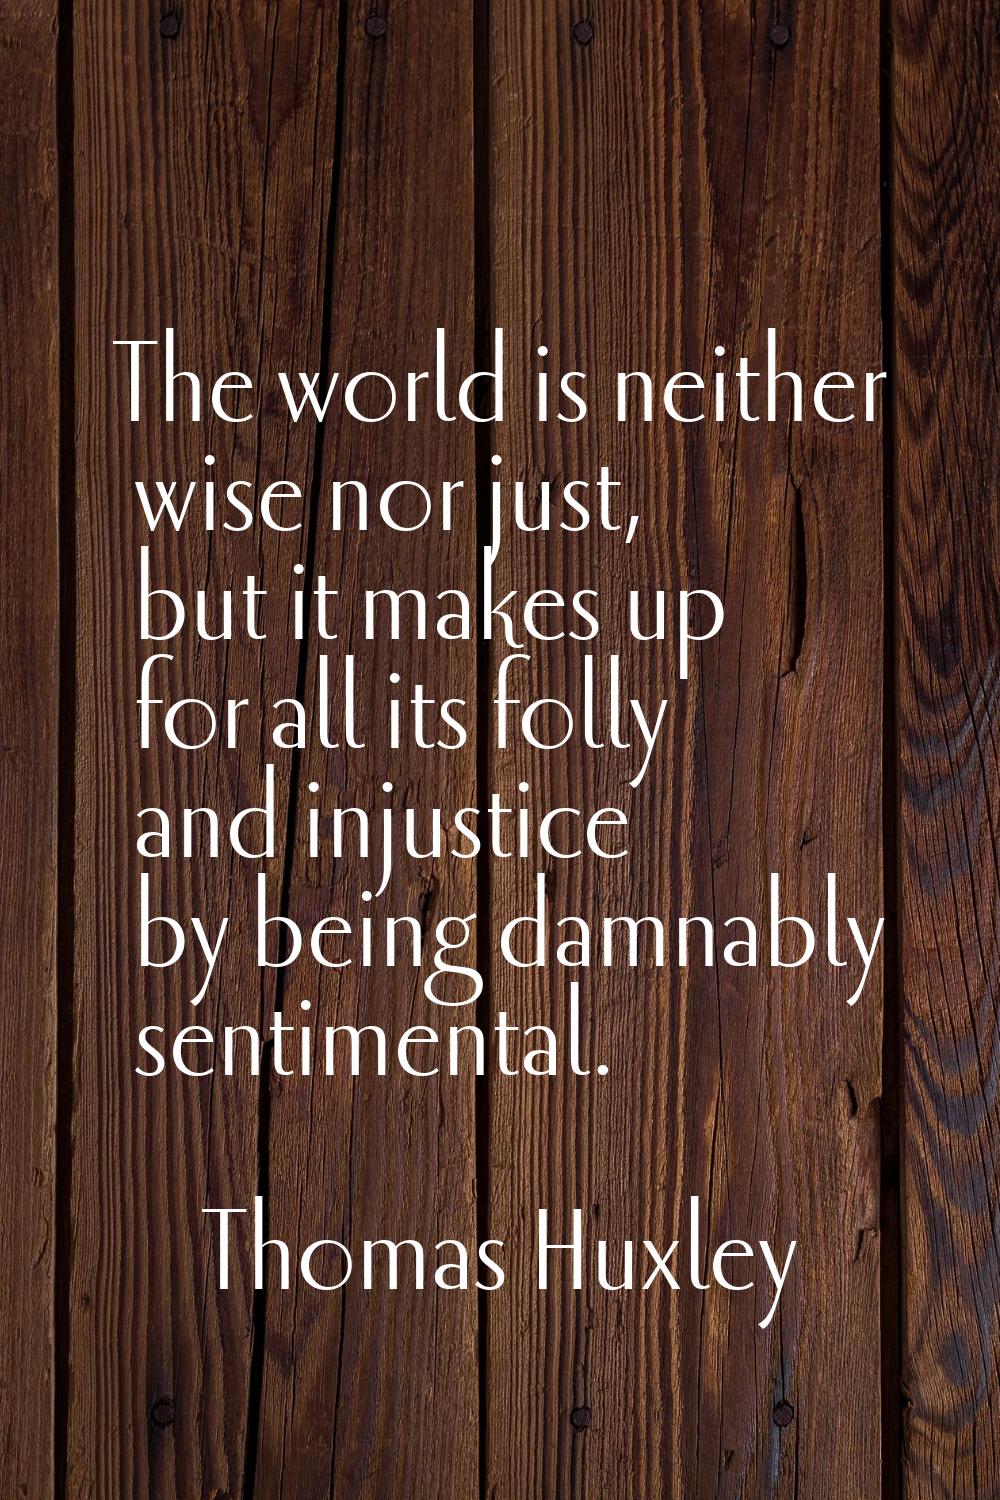 The world is neither wise nor just, but it makes up for all its folly and injustice by being damnab